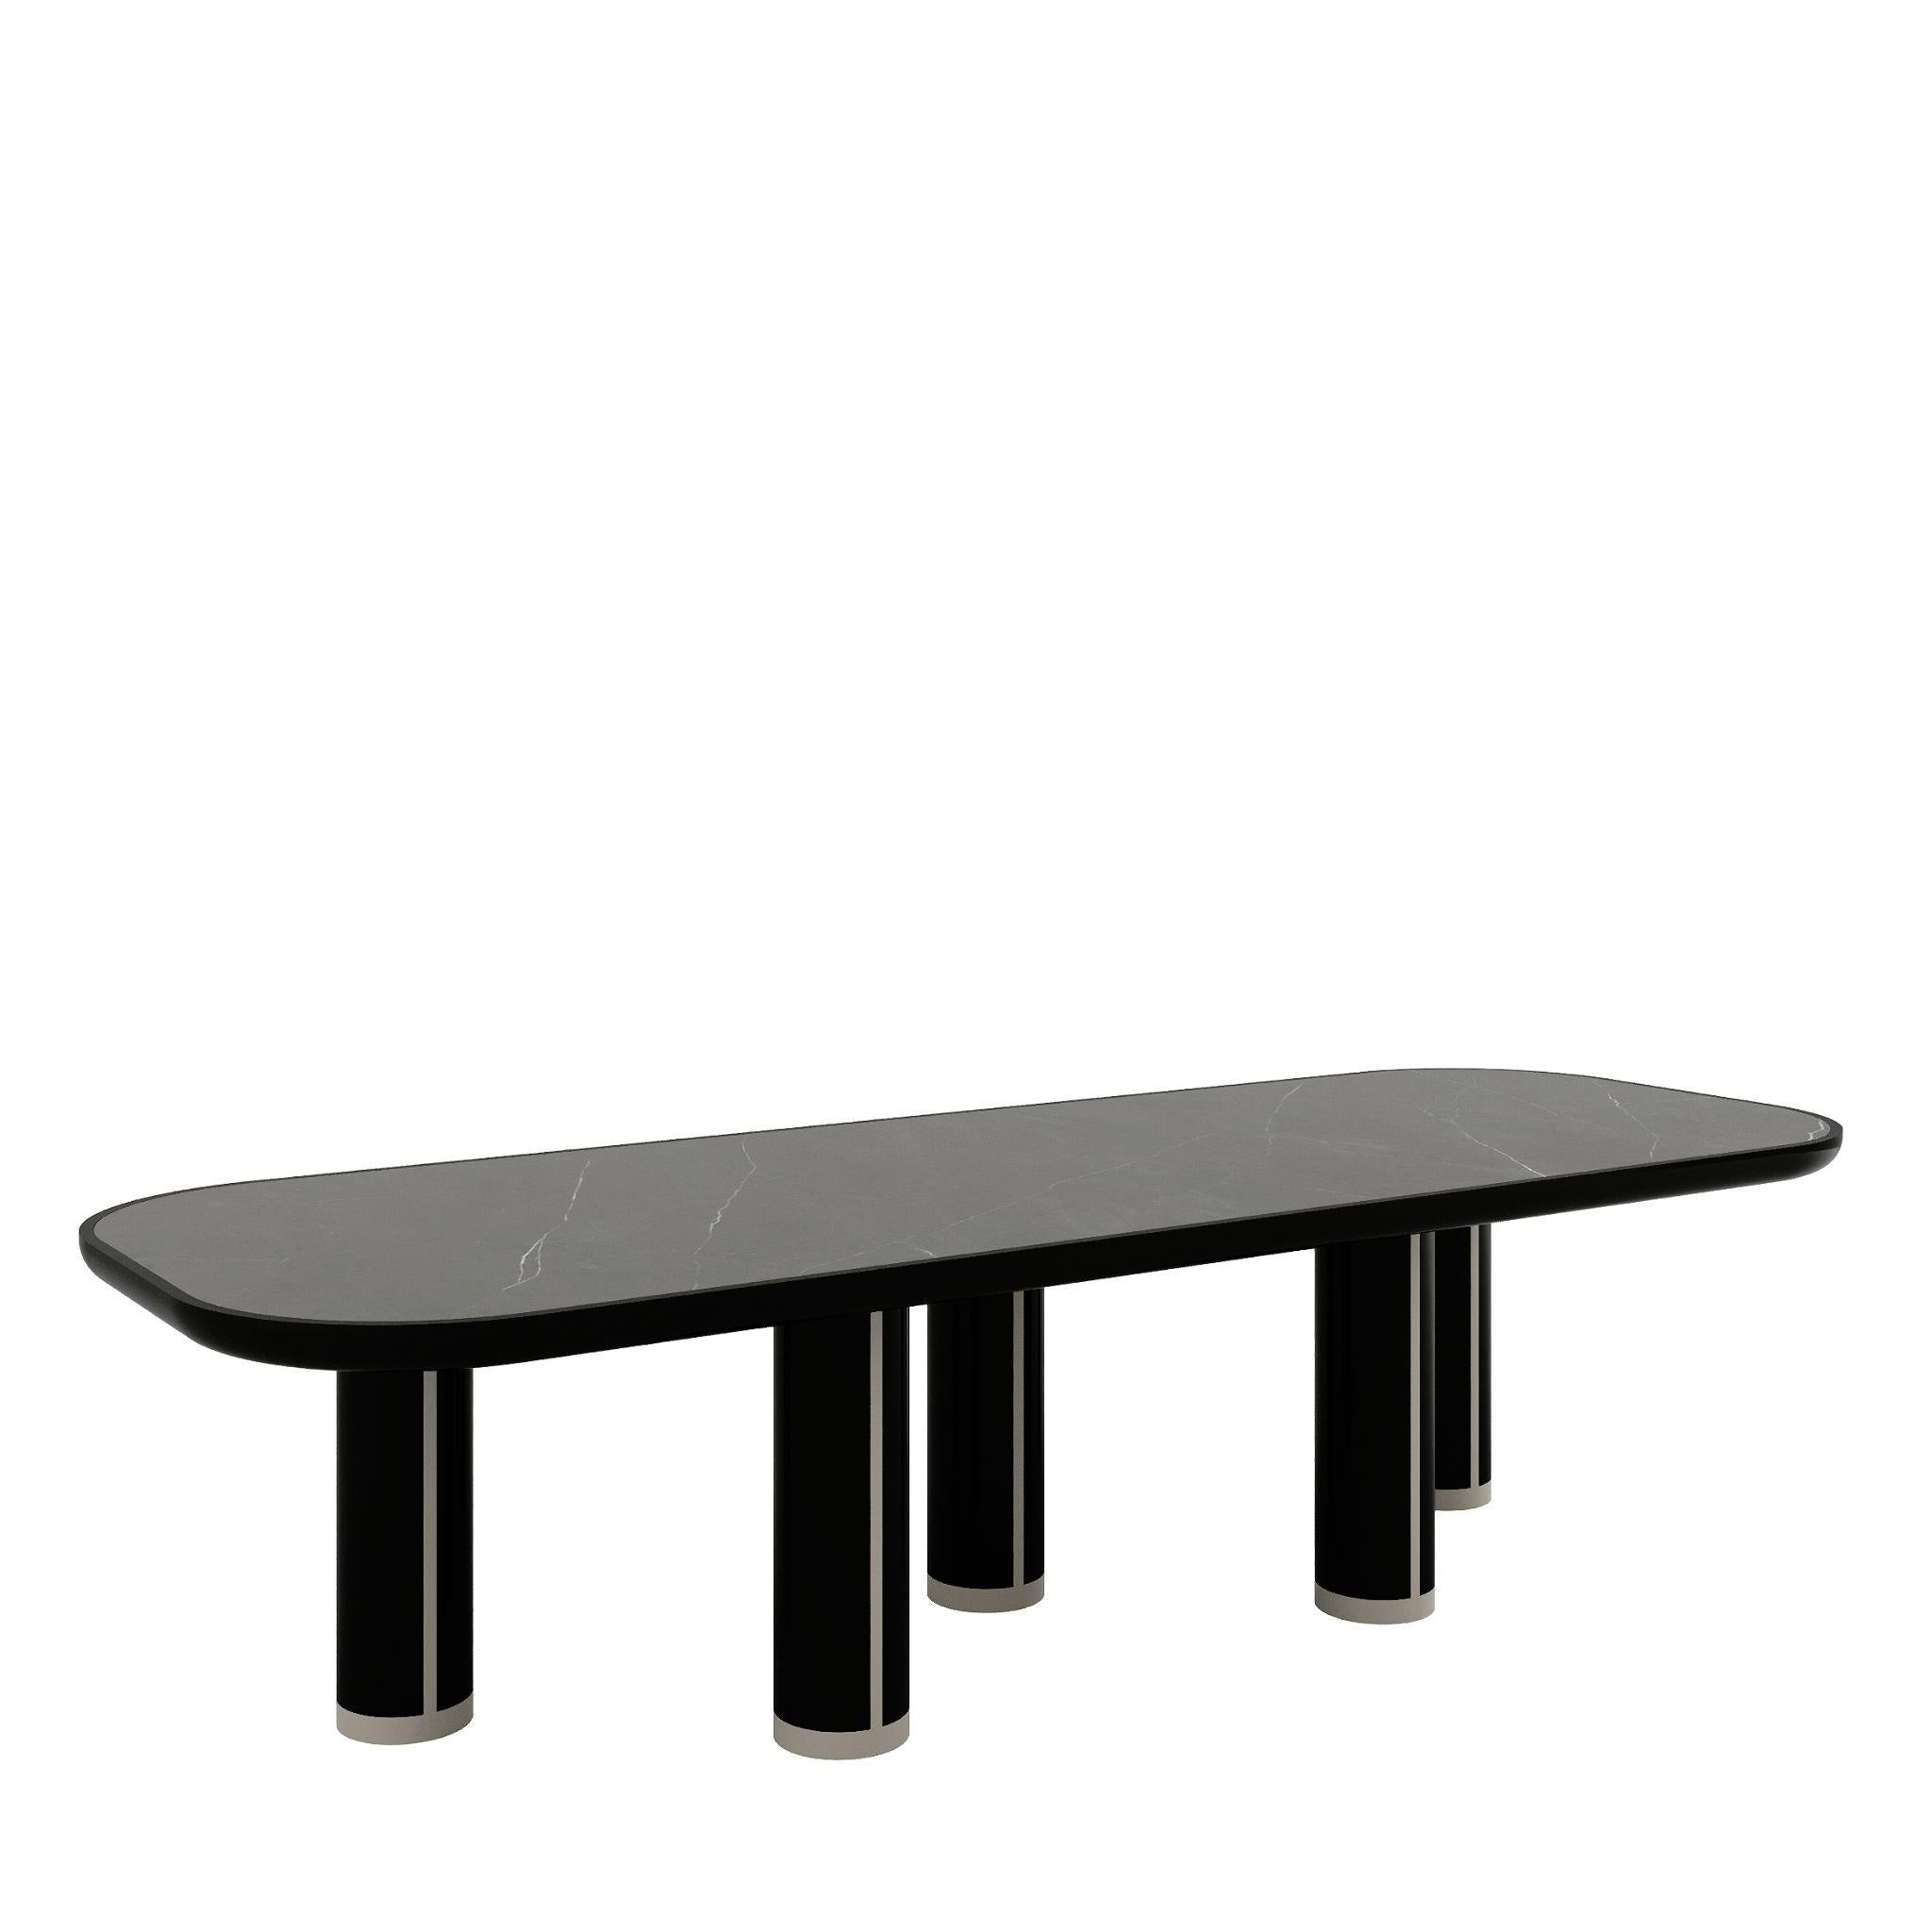 Portuguese BEL-AIR five-legged dining table with ceramic top For Sale